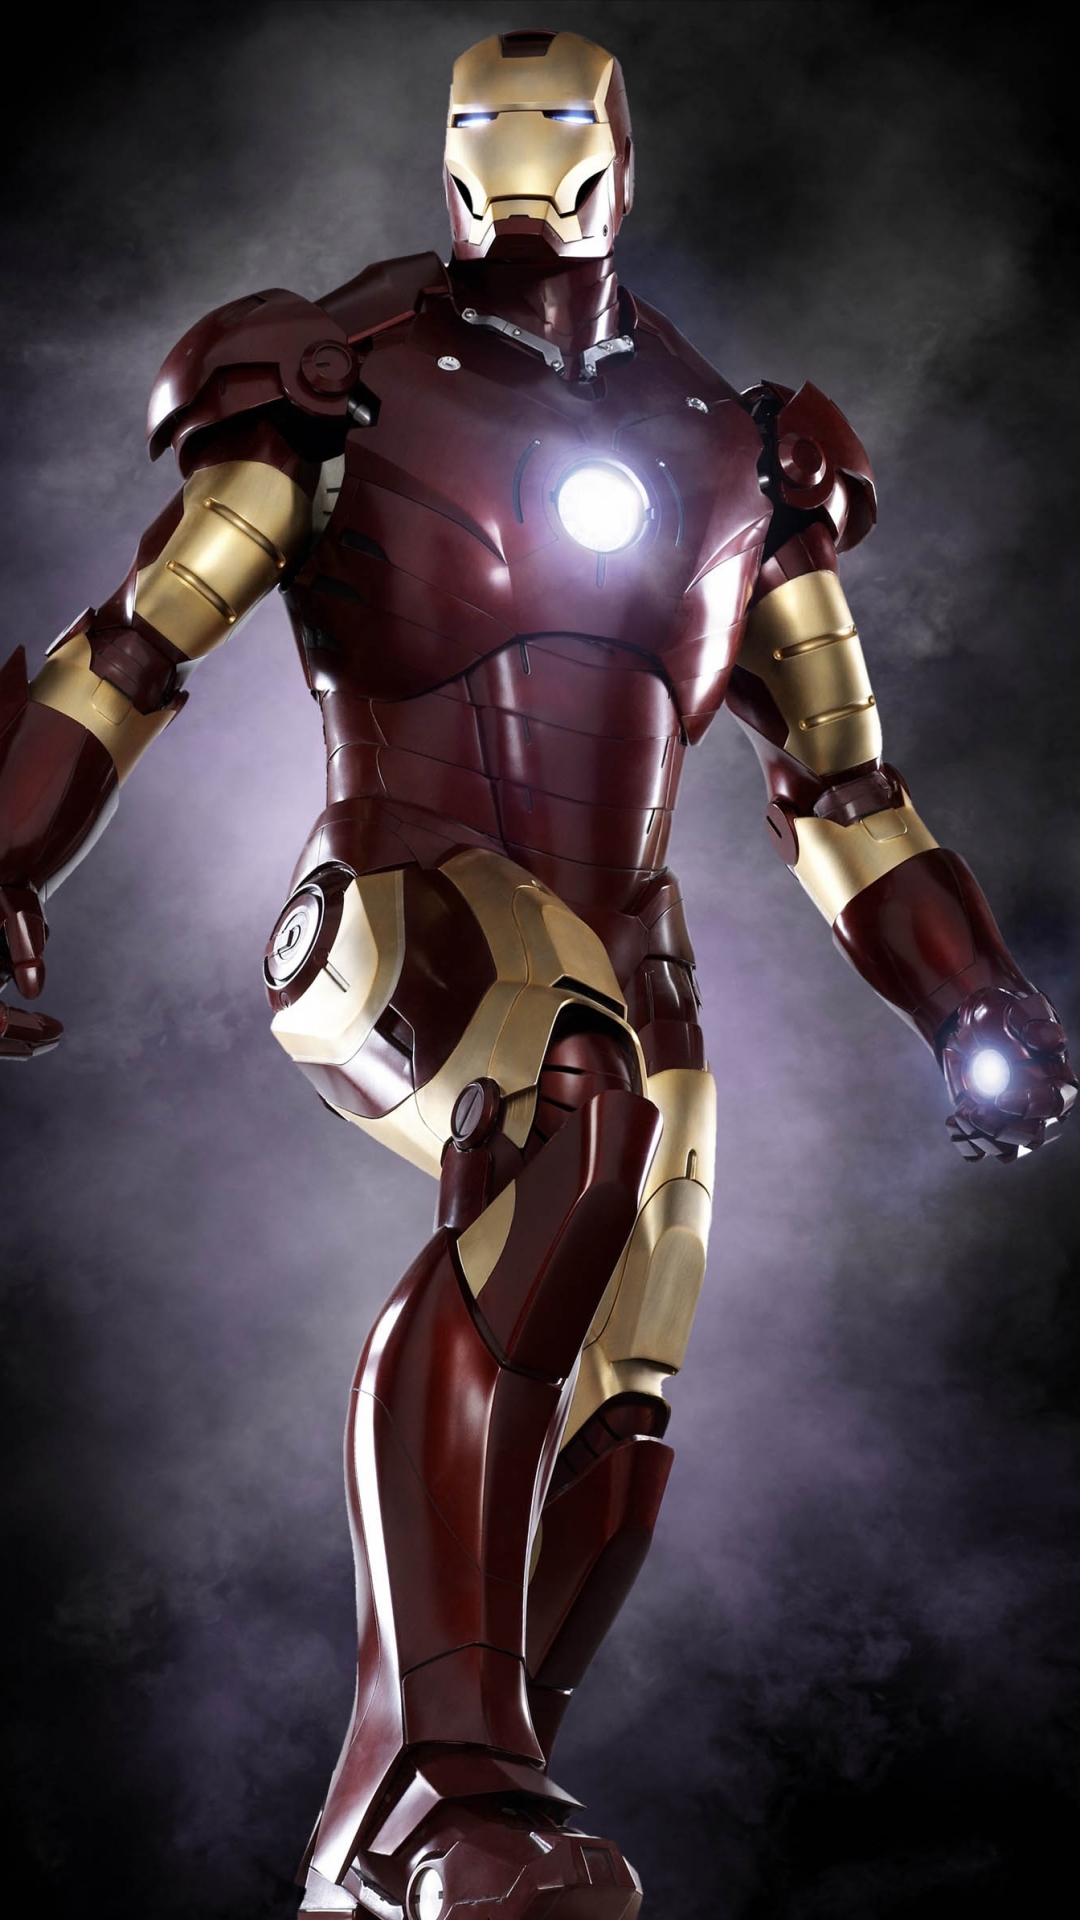 Movie Iron Man 3 1080x1920 Wallpaper ID 44293 Mobile Abyss